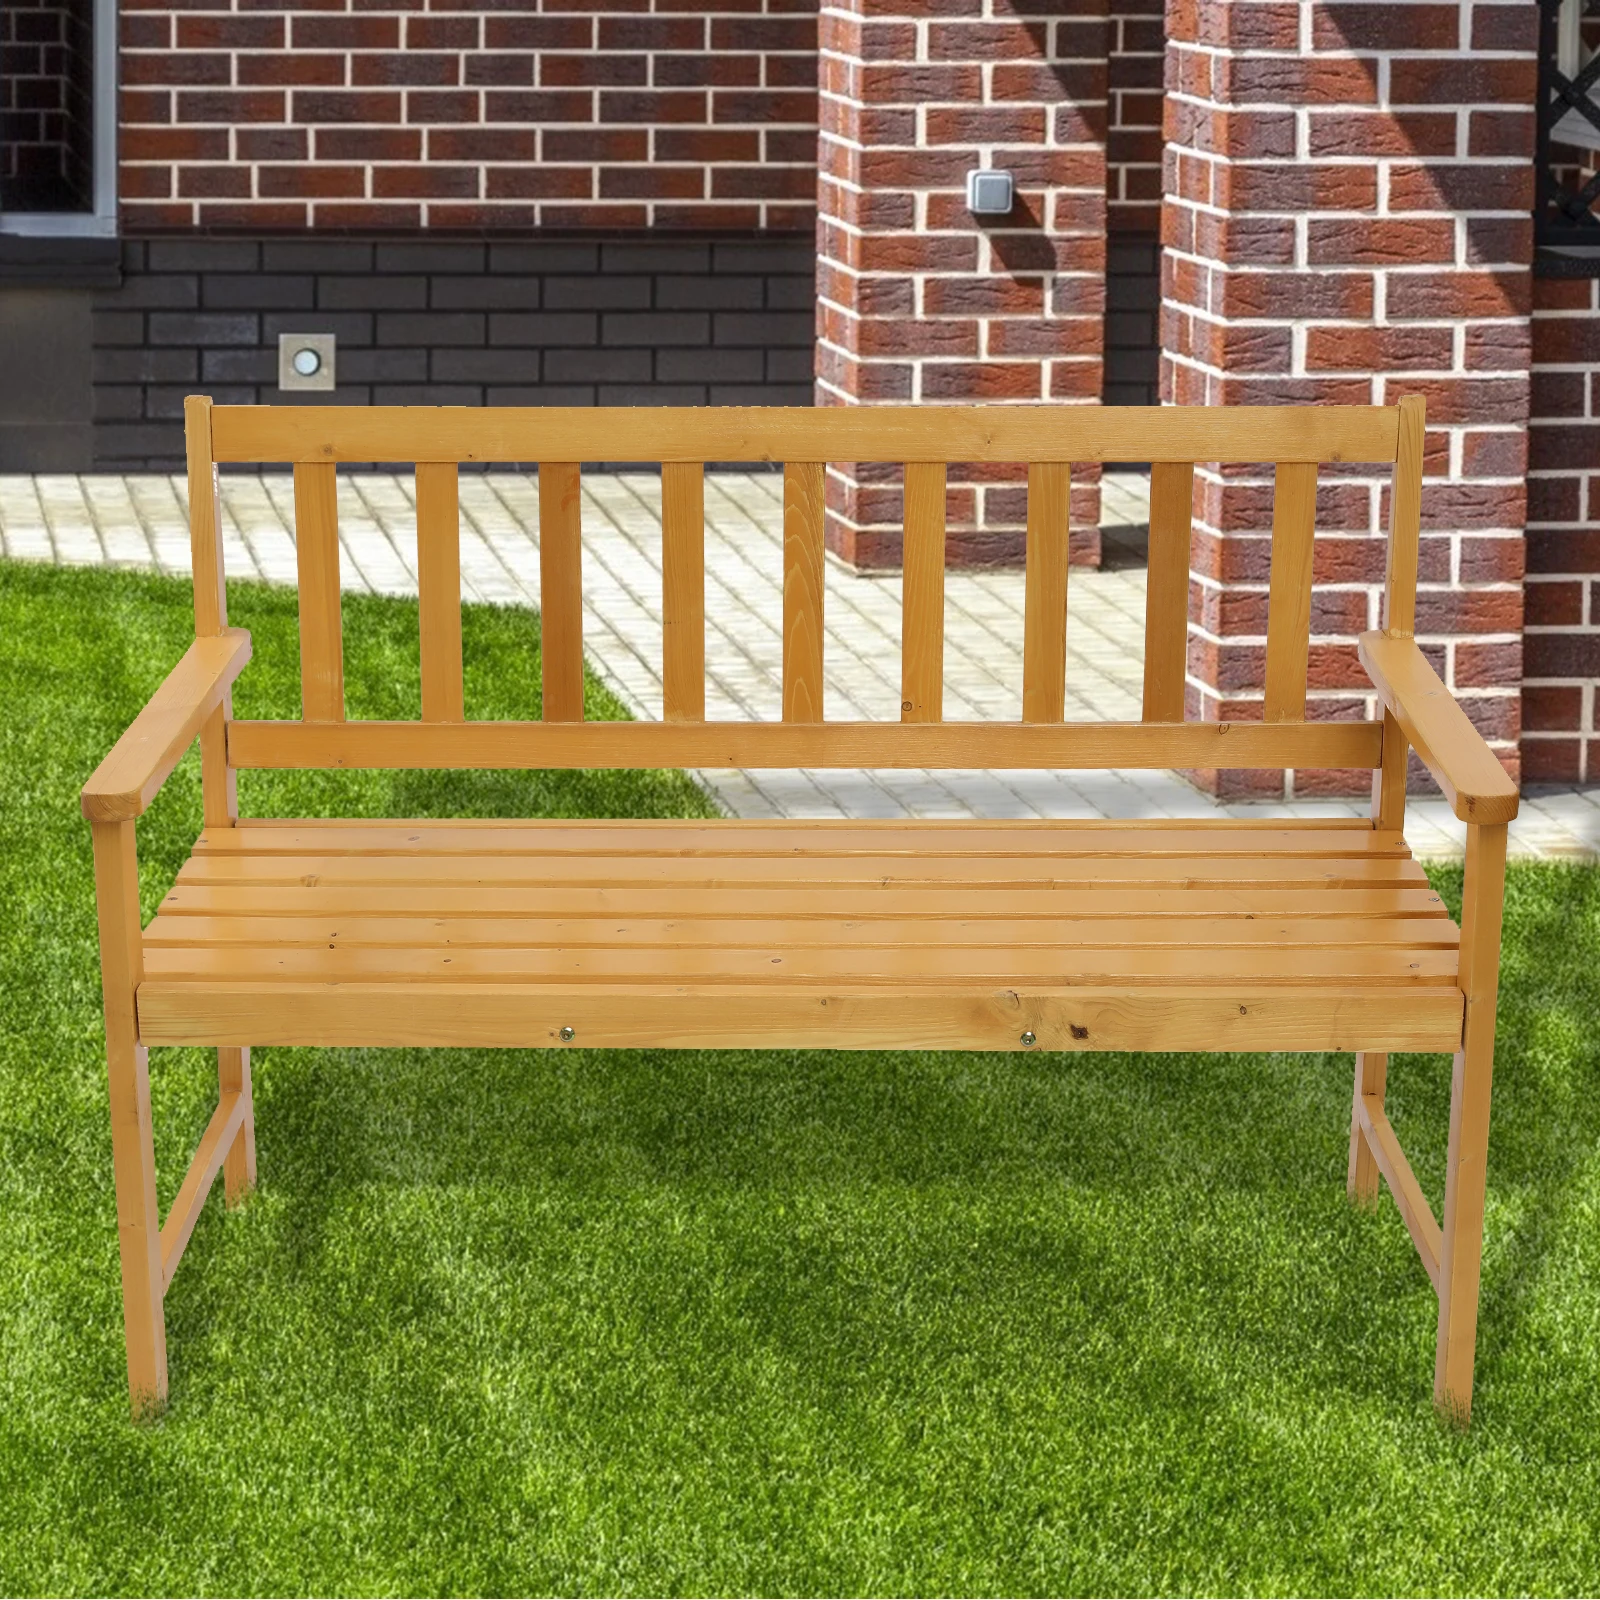 44in Slatted Eucalyptus Wooden Garden Bench for 2 Seater in Entry Way for Outdoor, Park, Yard, Patio Furniture Chair Teak Color wooden miniature park chair garden crafts figurines white park benches chair mini landscape ornament doll furniture